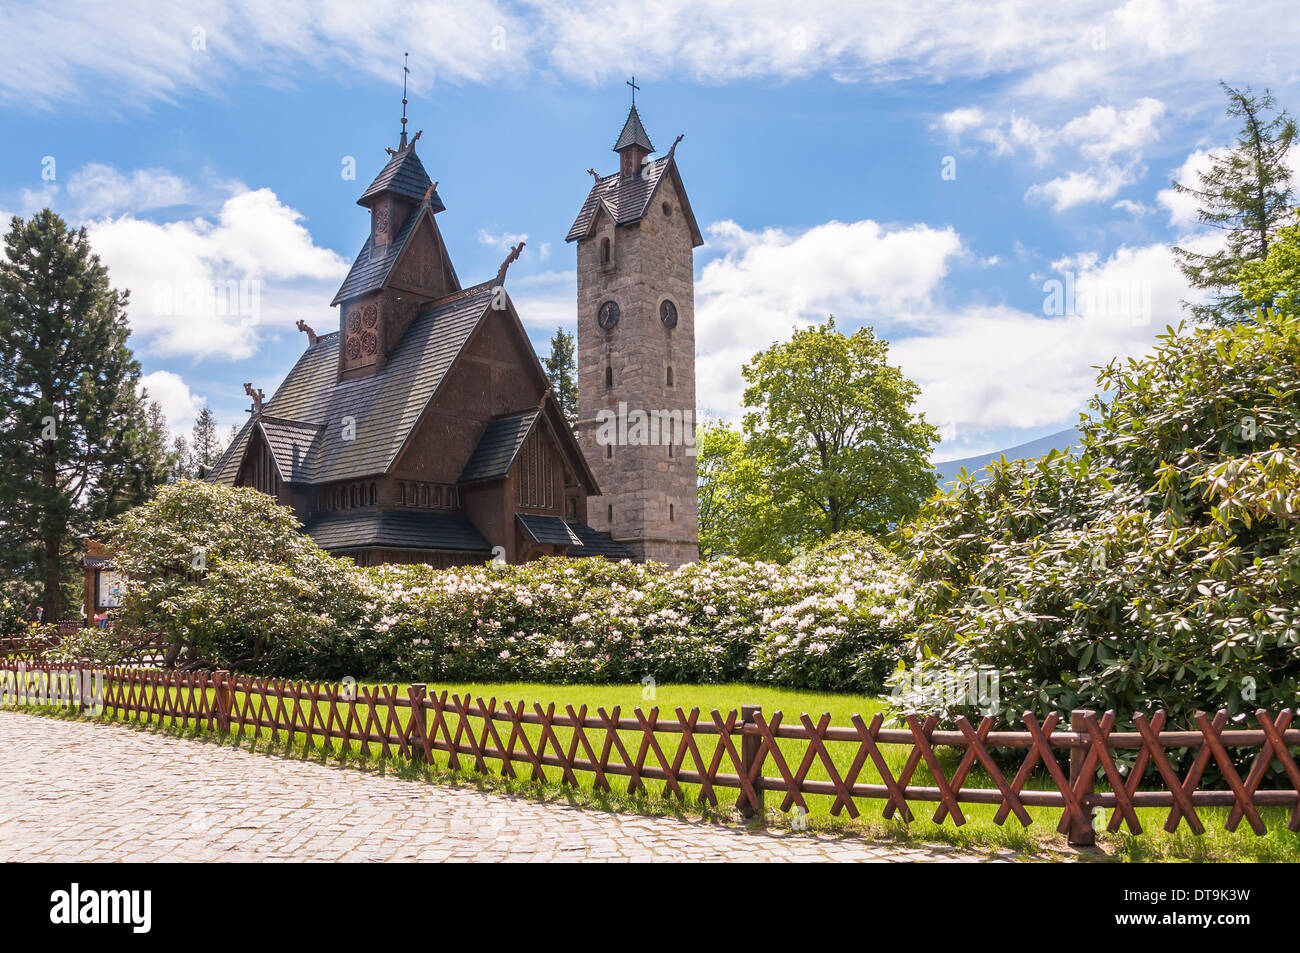 Old, wooden, Norwegian temple Wang in Karpacz, Poland Stock Photo